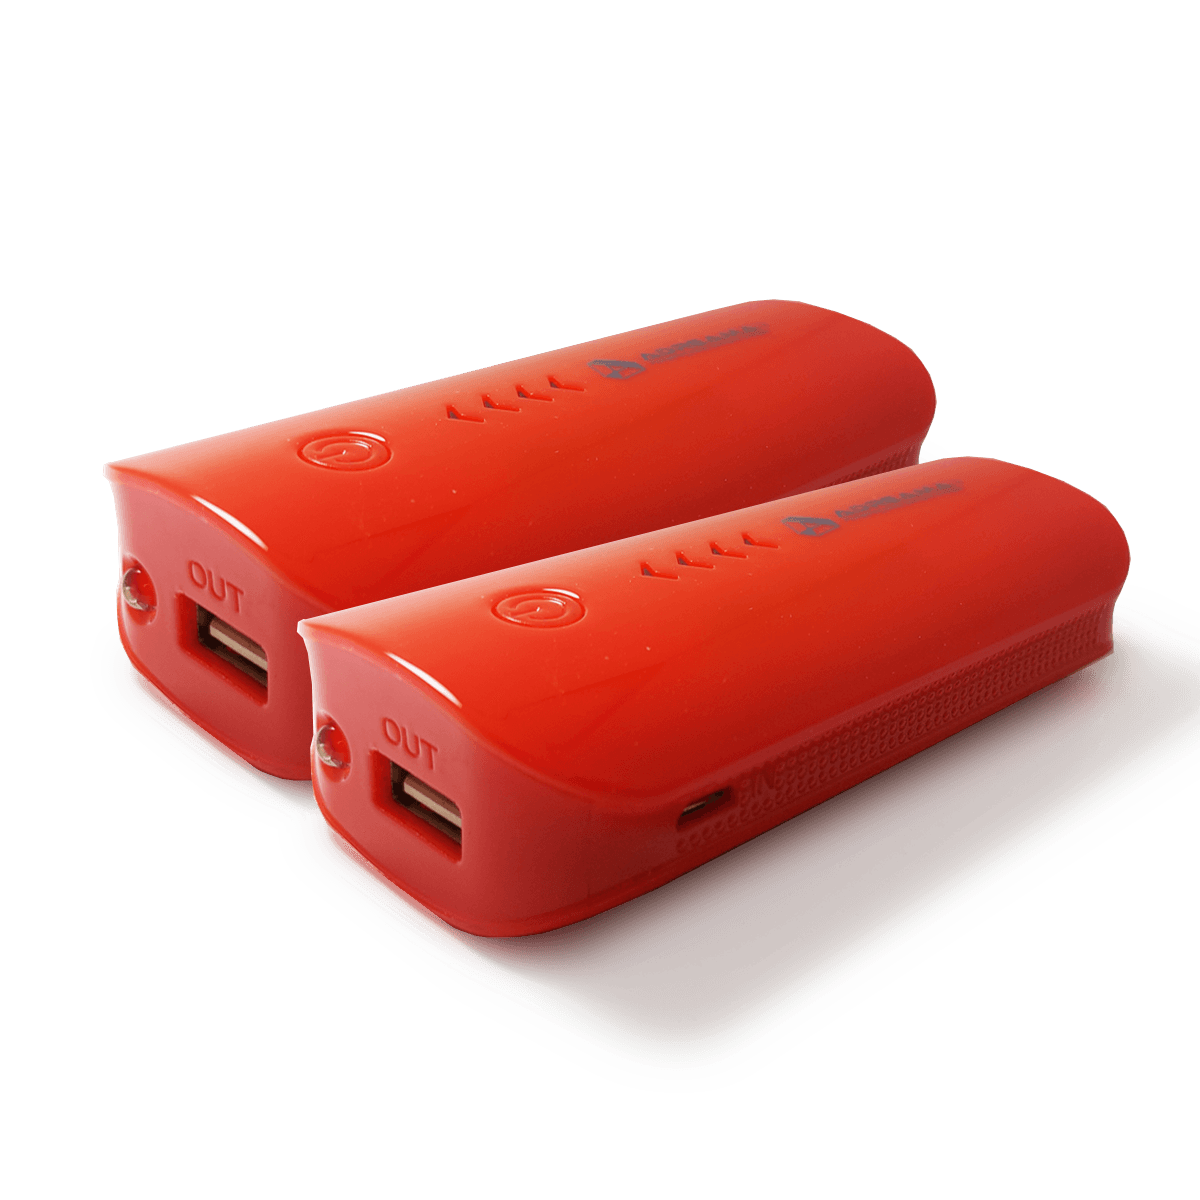 6000mAh Power Bank, Portable Charger with USB-A Port, Red, Three-quarter Angle View, Two-Pack.